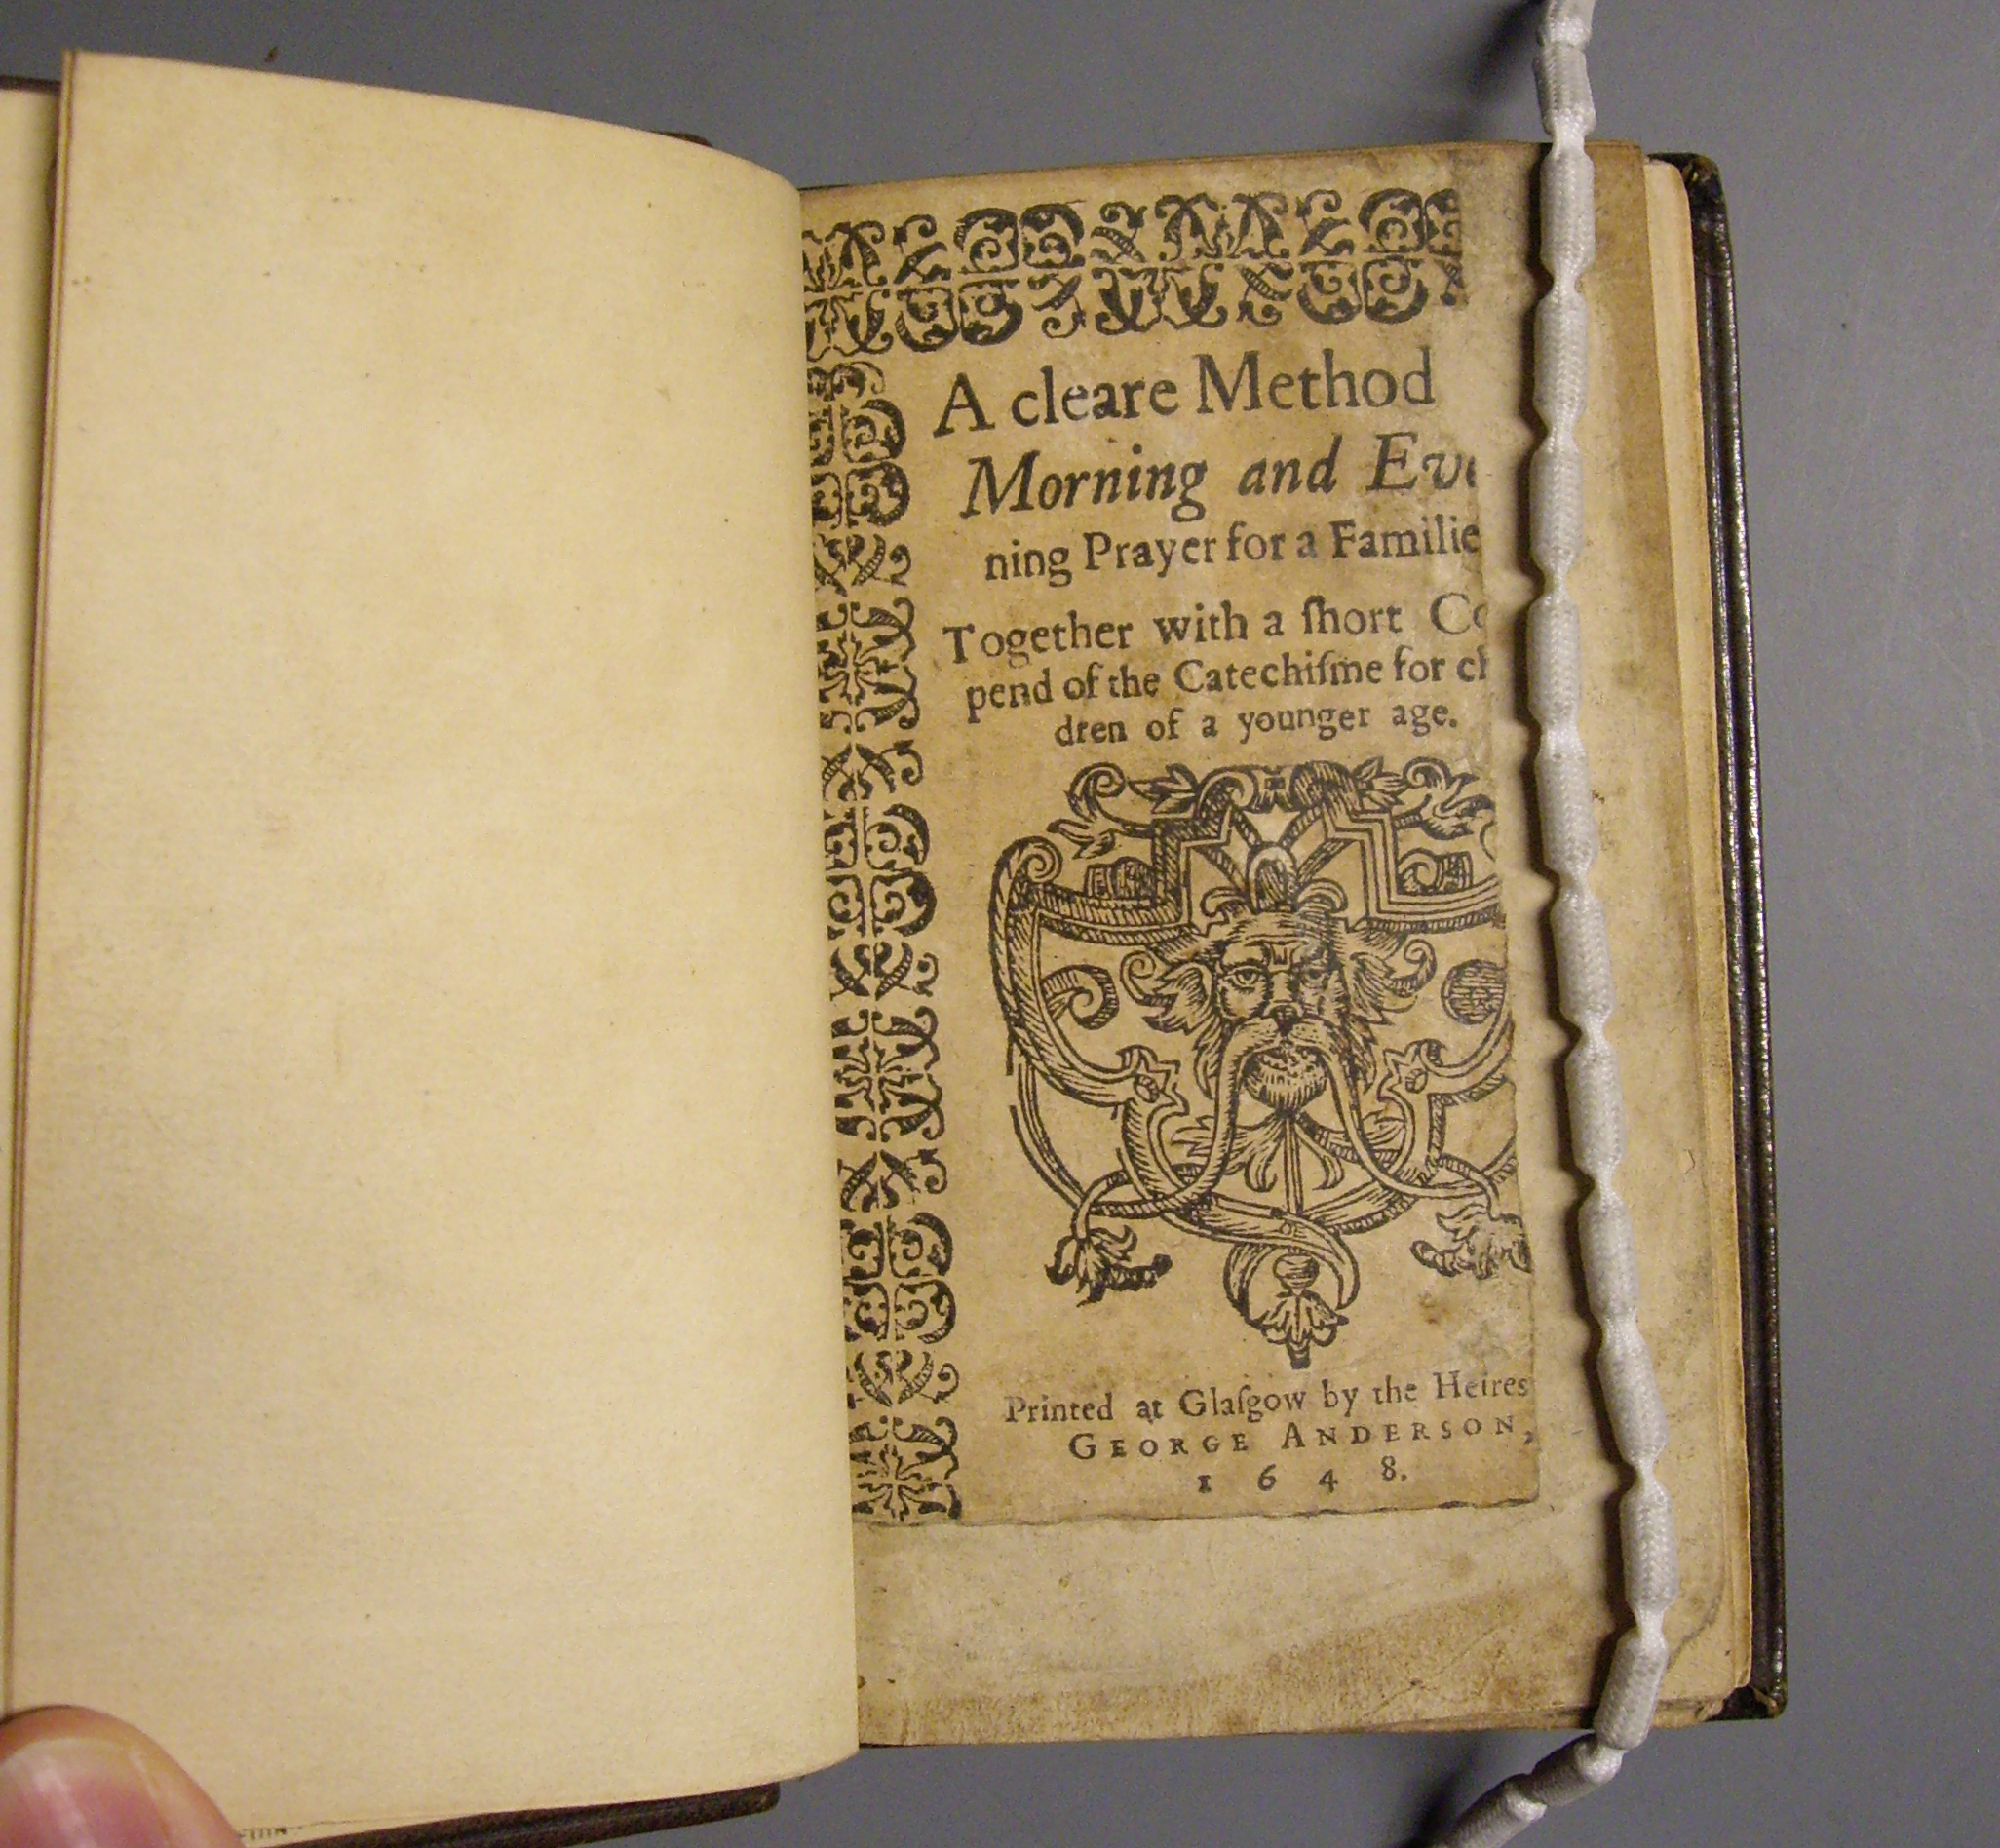 Title page of the NLS copy of “A cleare method for morning and evening prayer for a familie" (shelfmark ABS.1.83.56(1), photo courtesy of Robert Betteridge and the NLS)